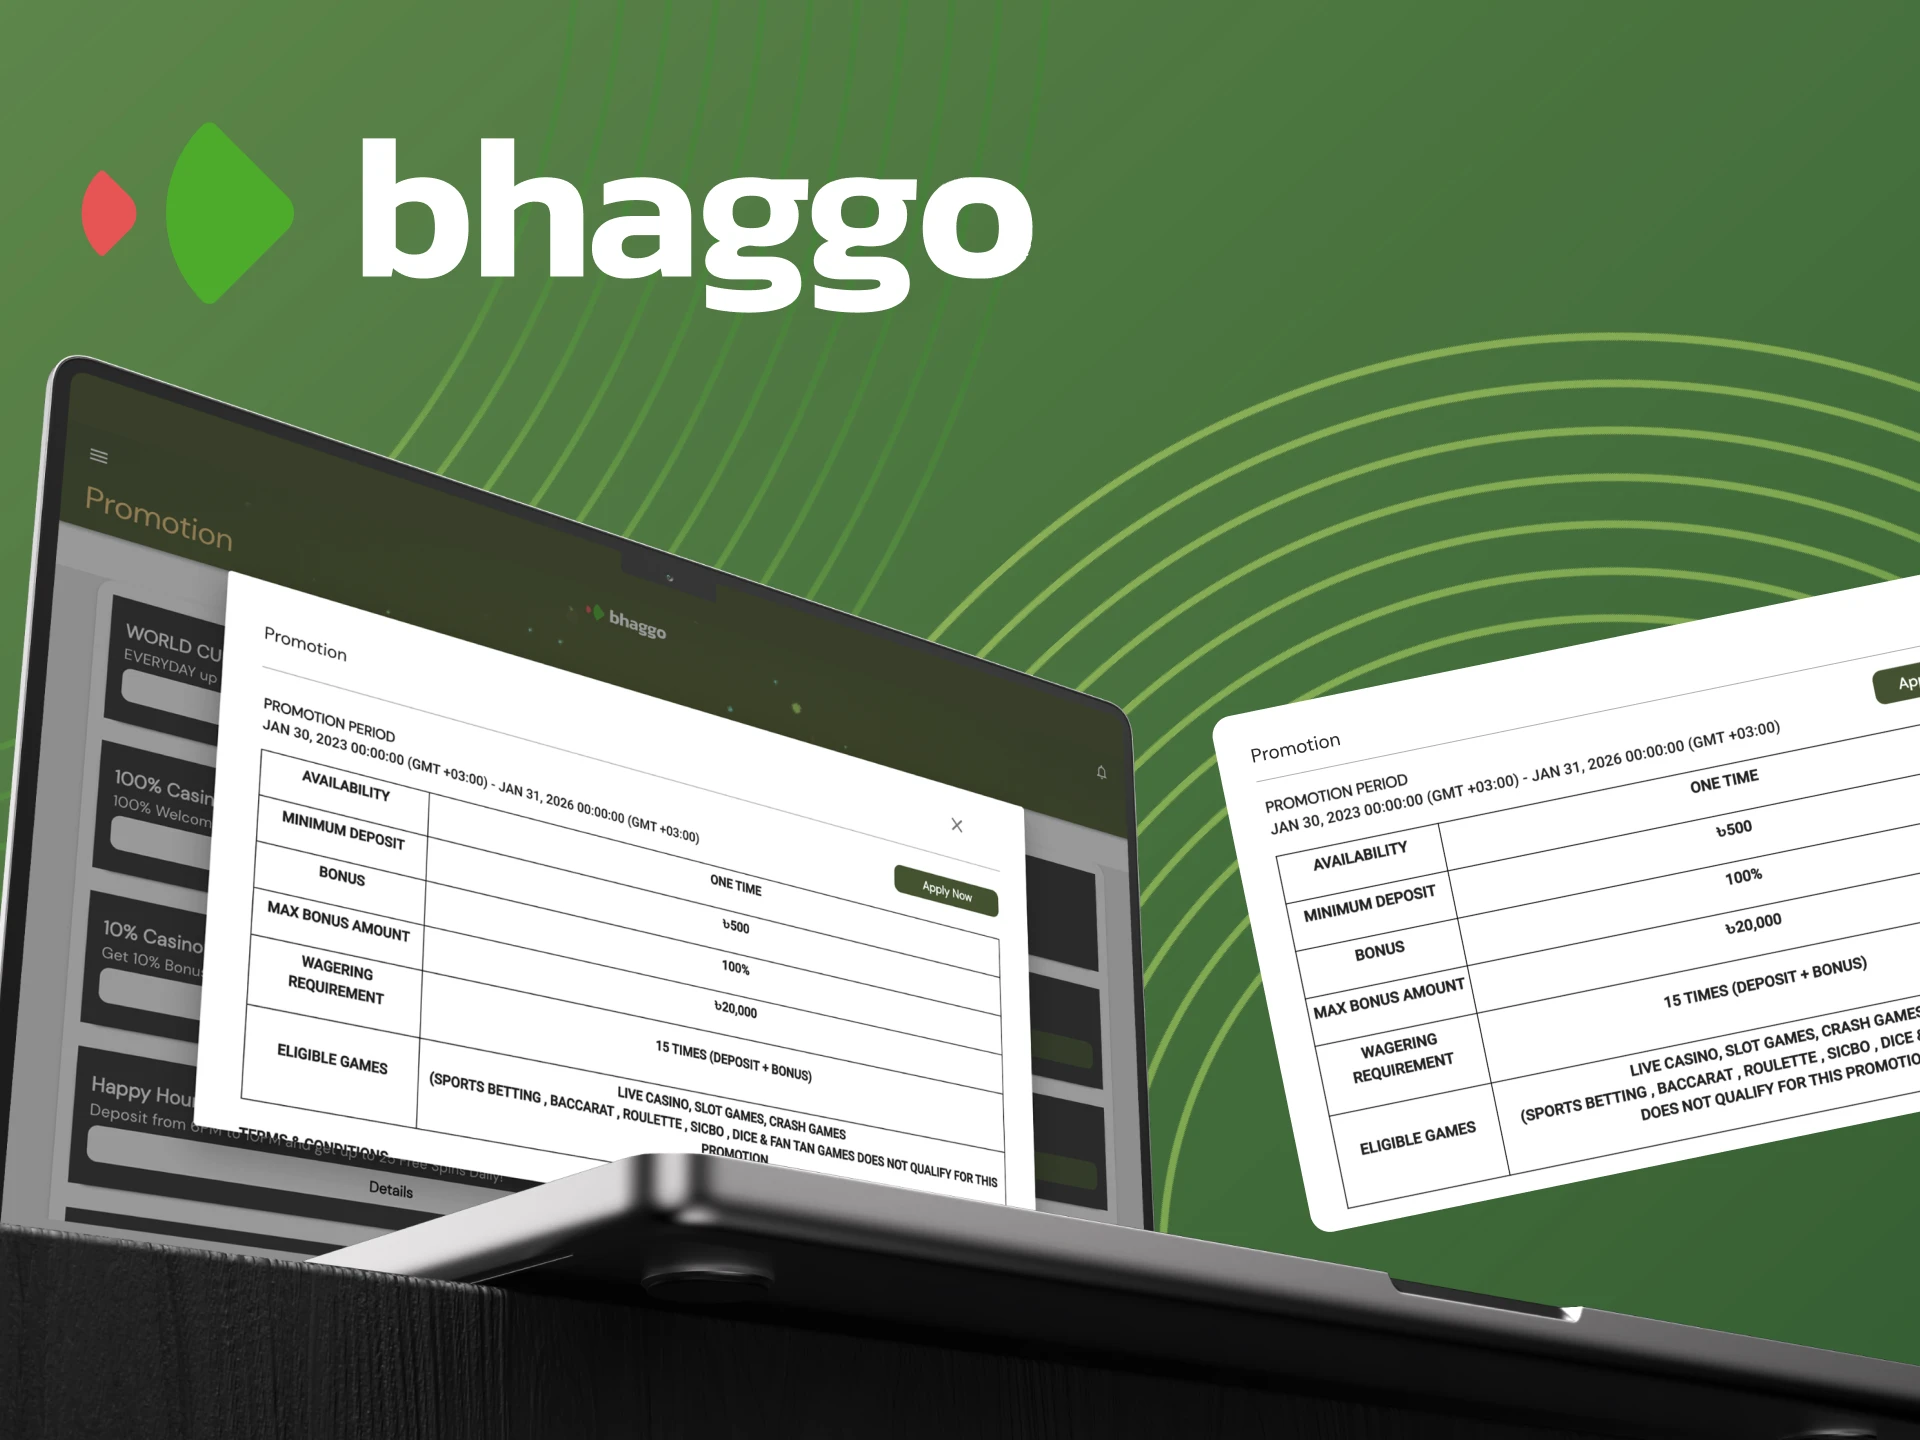 What bonuses can I get after registering at Bhaggo online casino.